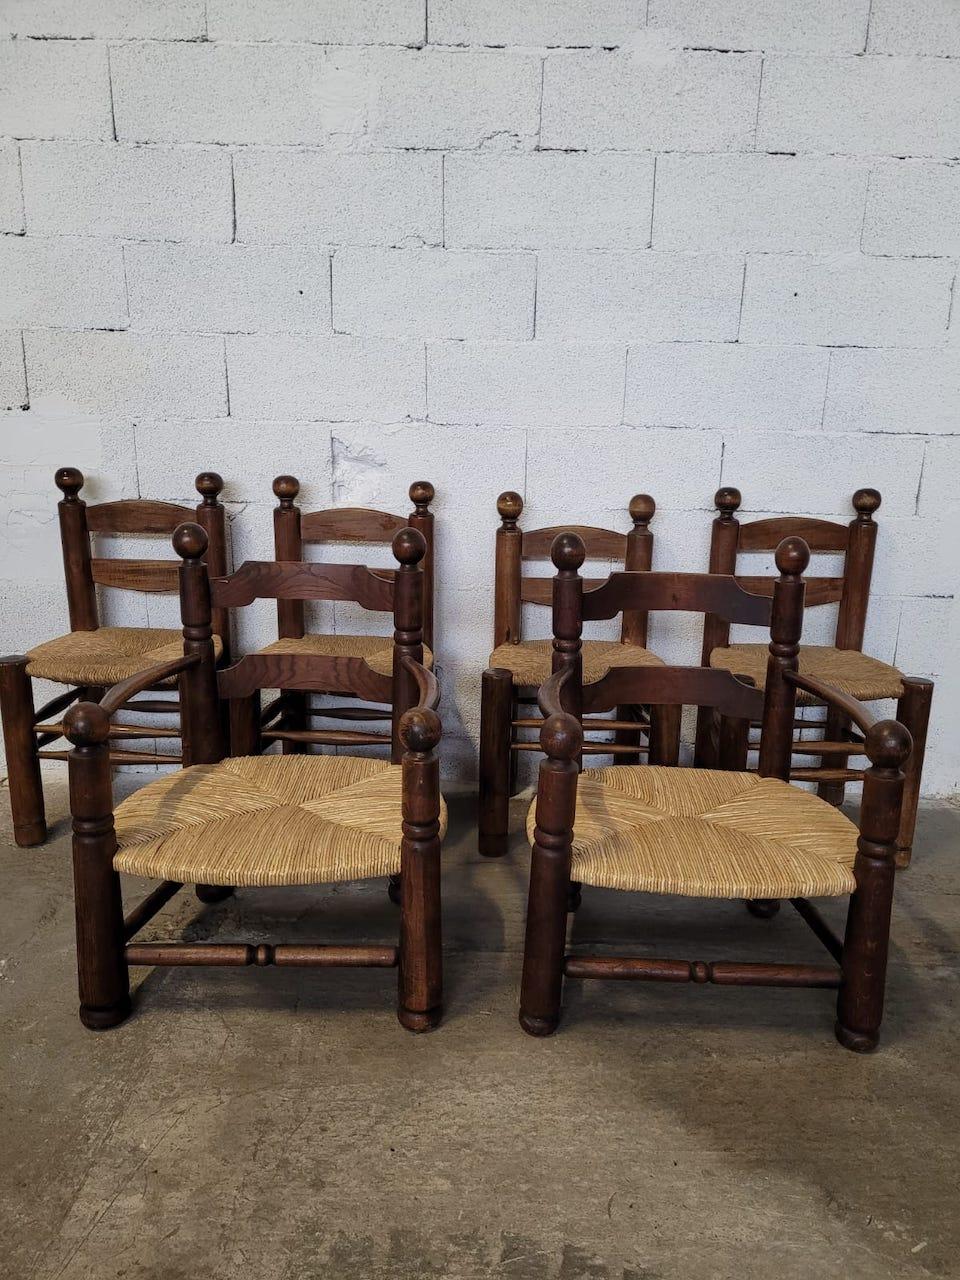 Set of 4 Charles Dudouyt 1940 chairs and 2 armchairs in oak and straw seats. The seats of the armchairs have been completely redone. 
Chair dimensions: H 84 x W48 x P38 Seat height: 44 cm 
Armchair dimensions H78 x W59 x P54 Seat height: 30 cm.